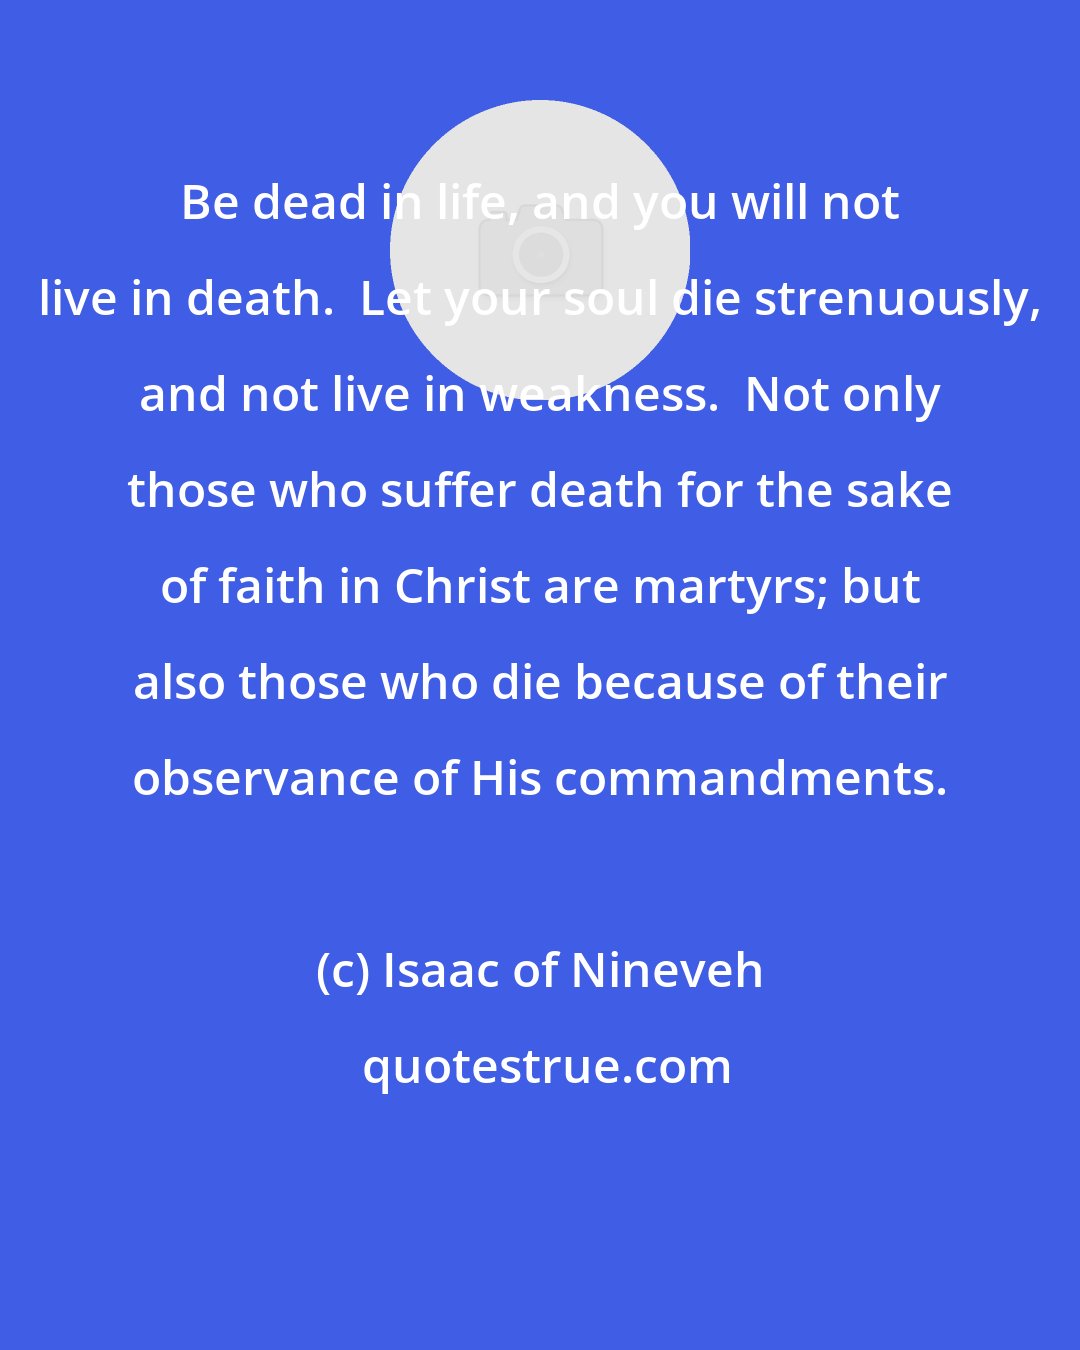 Isaac of Nineveh: Be dead in life, and you will not live in death.  Let your soul die strenuously, and not live in weakness.  Not only those who suffer death for the sake of faith in Christ are martyrs; but also those who die because of their observance of His commandments.